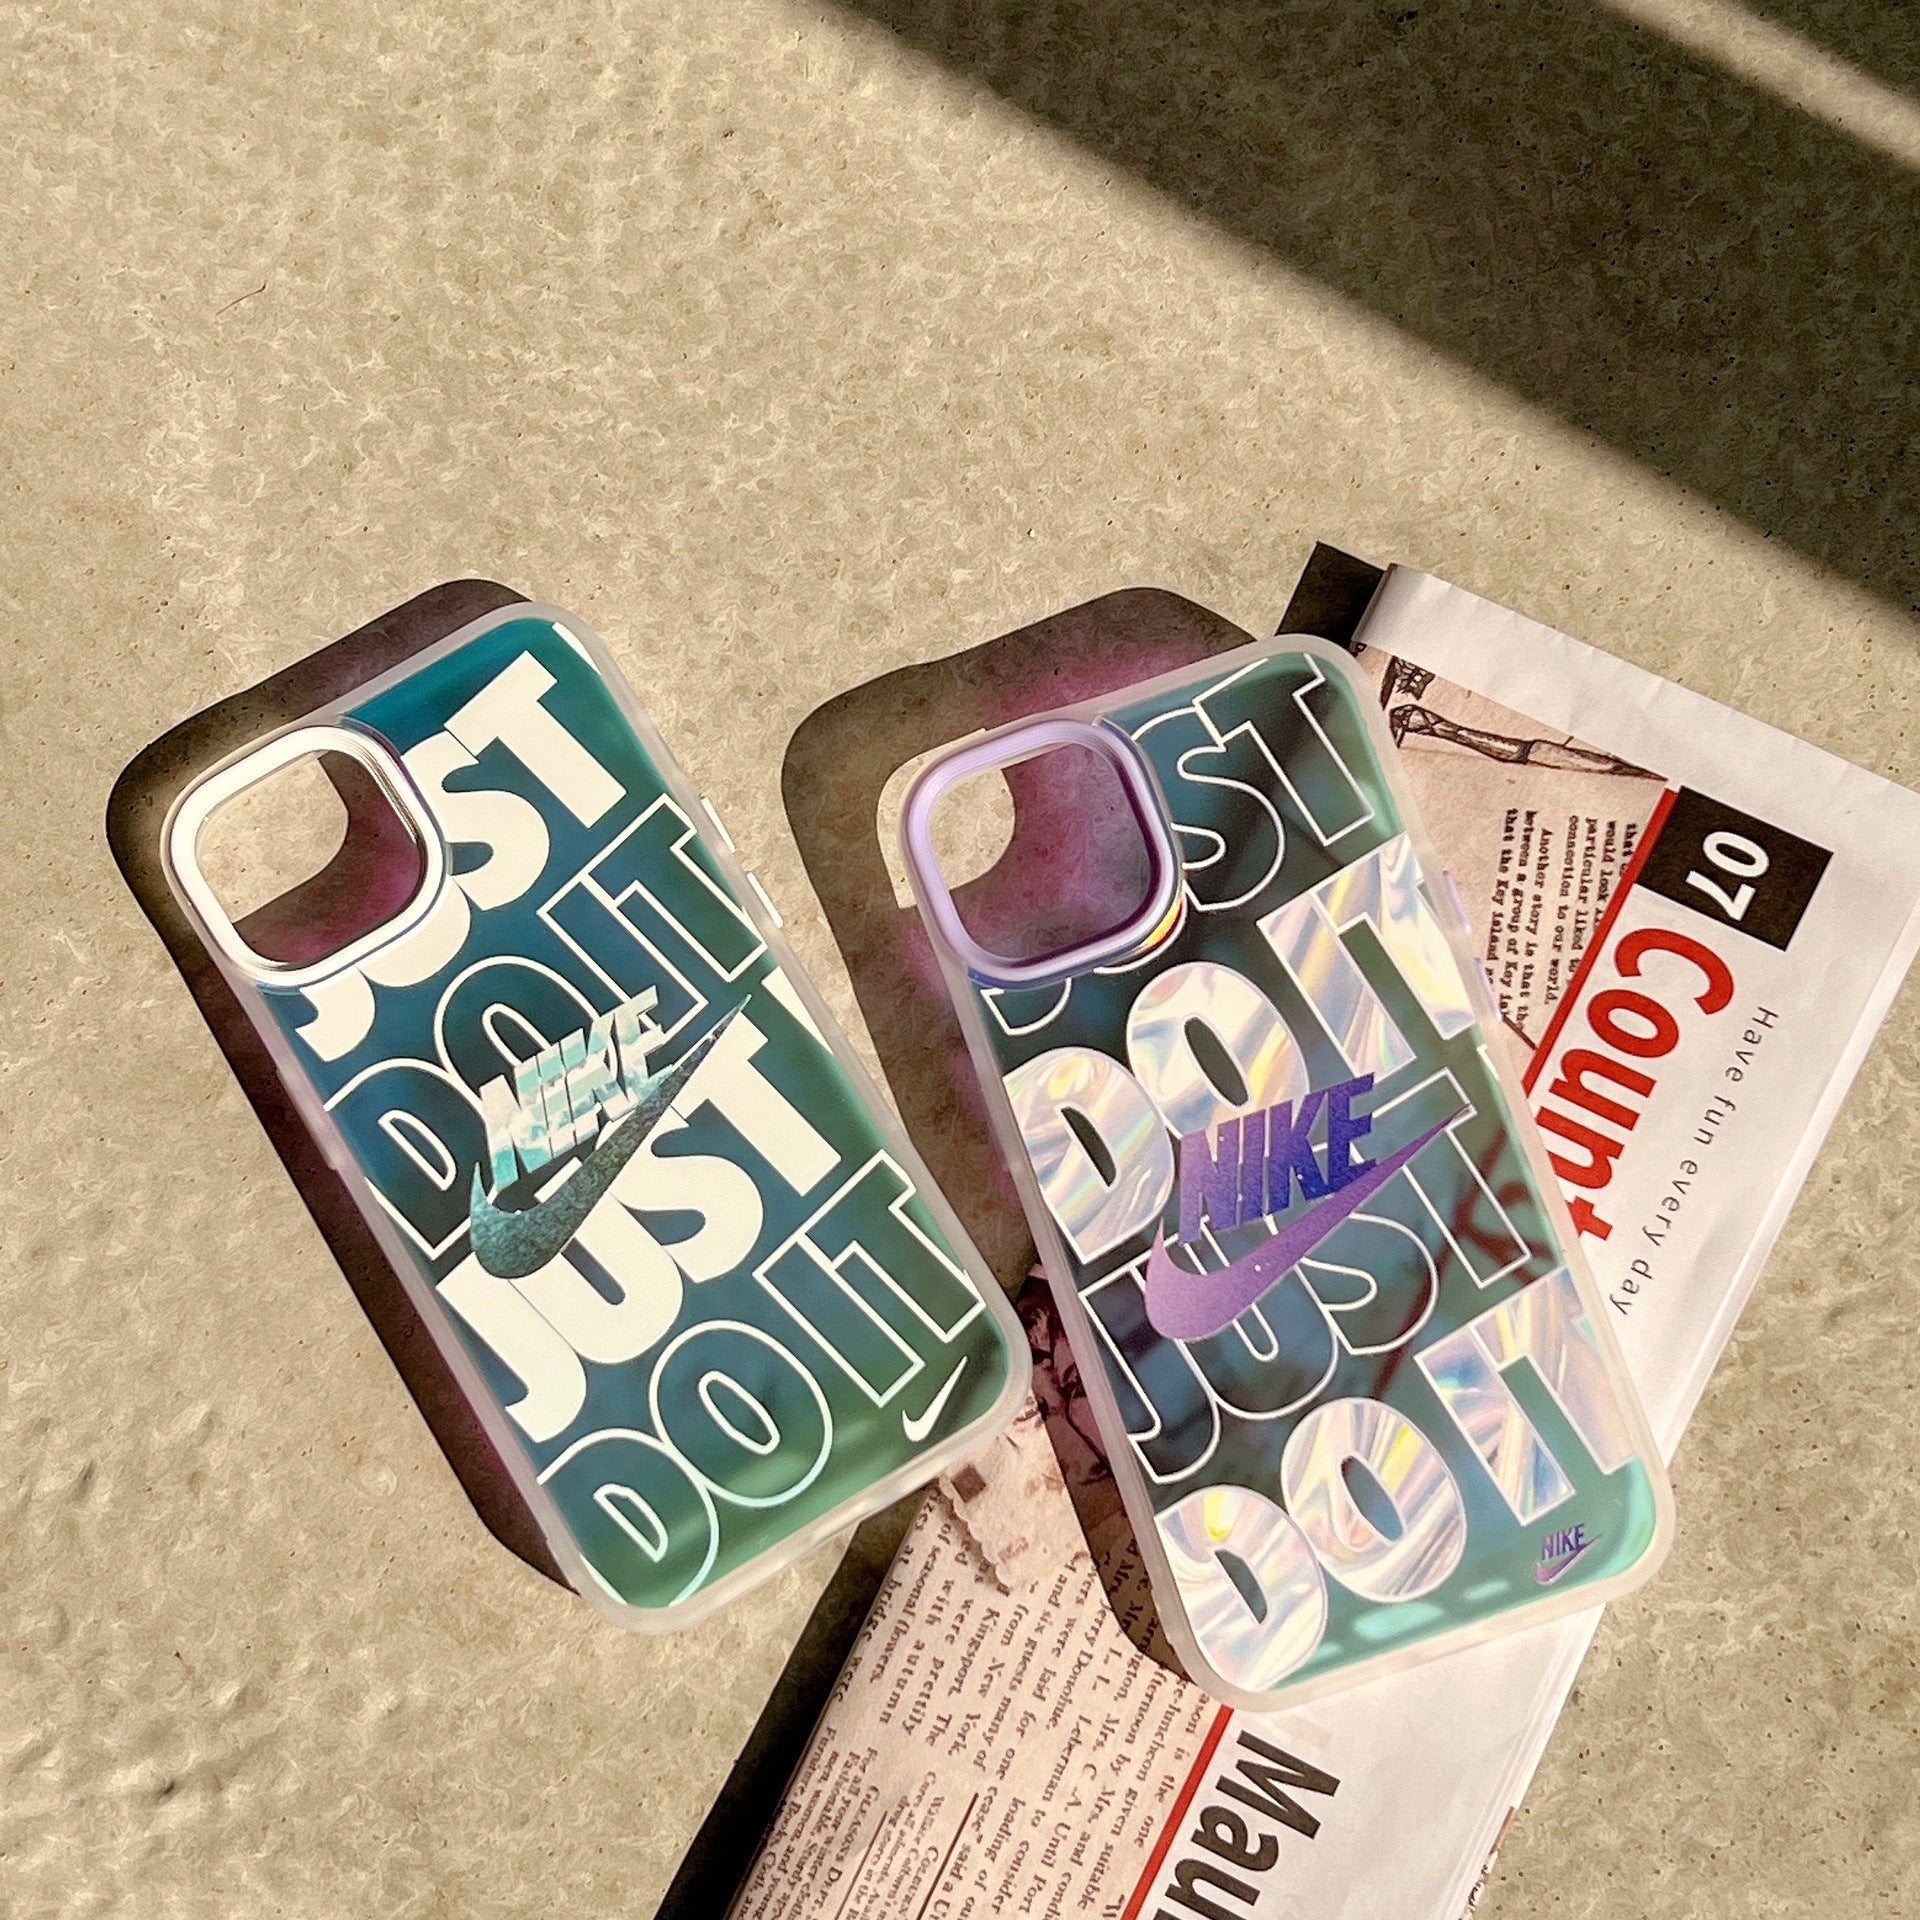 Nike Just Do It iPhone Case